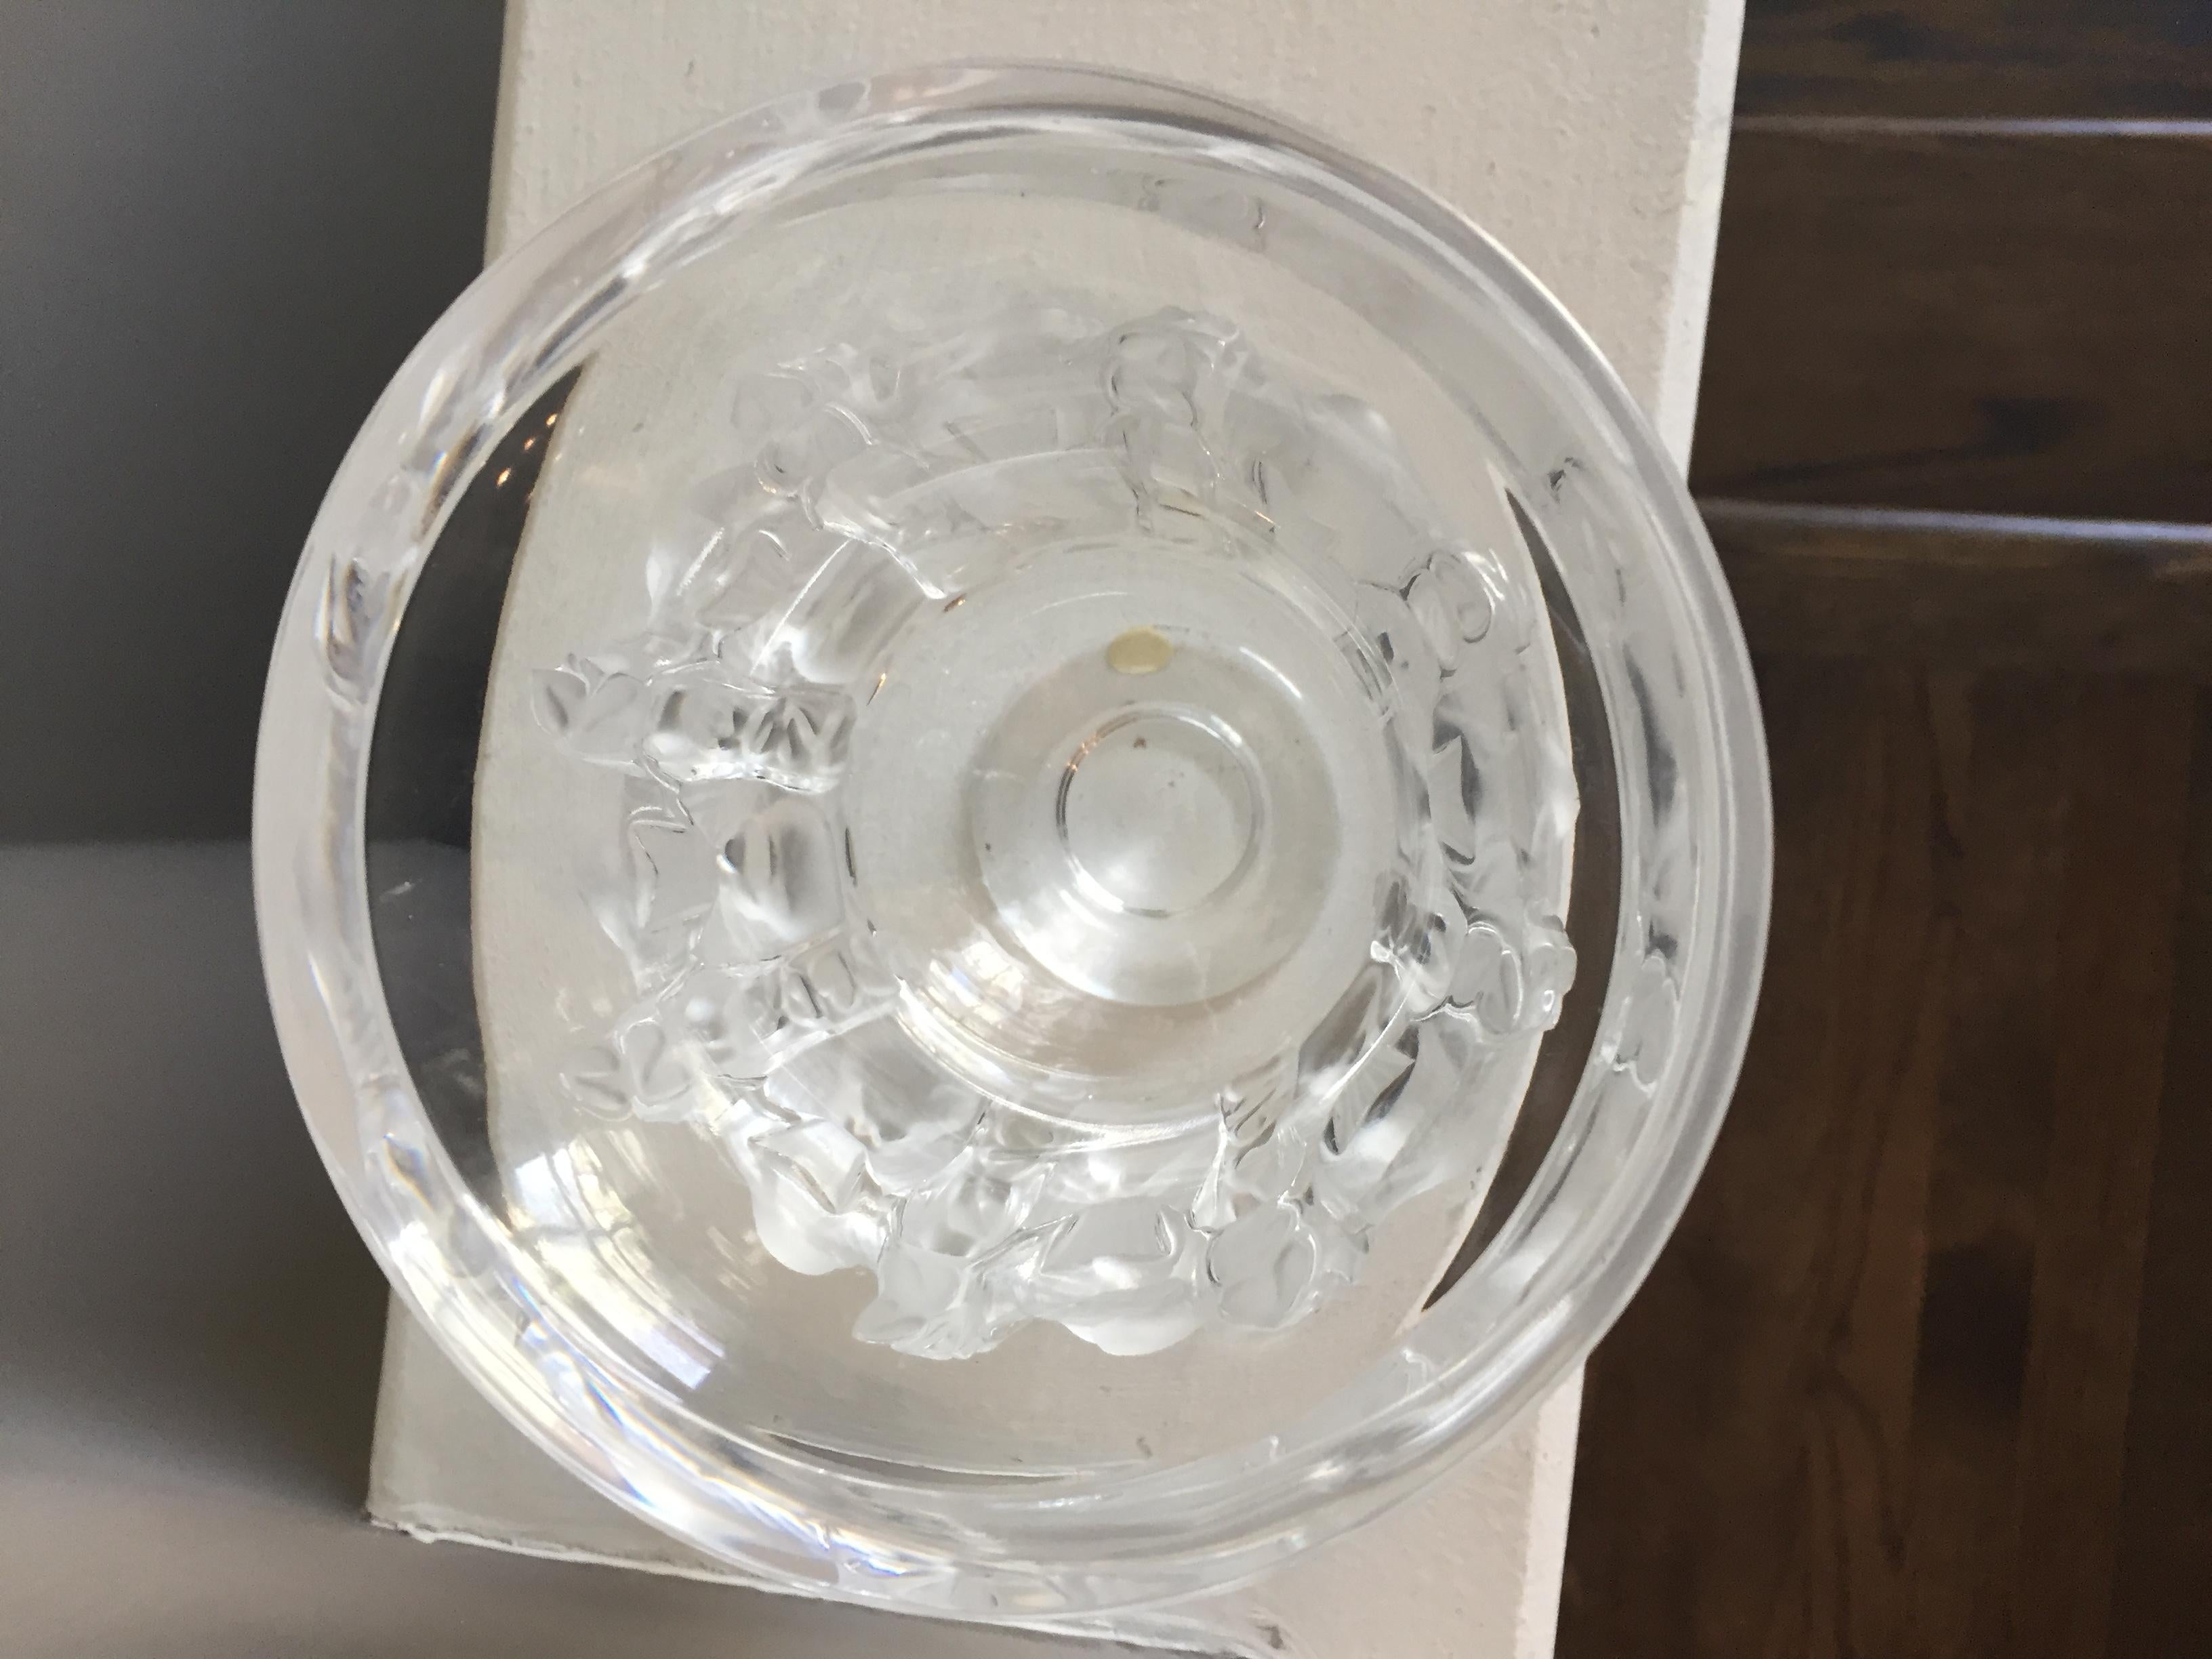 Lalique crystal, Vase Dampierre
Perfect  Mother's Day  Gift
Handmade in France.
Size: 4 9/10